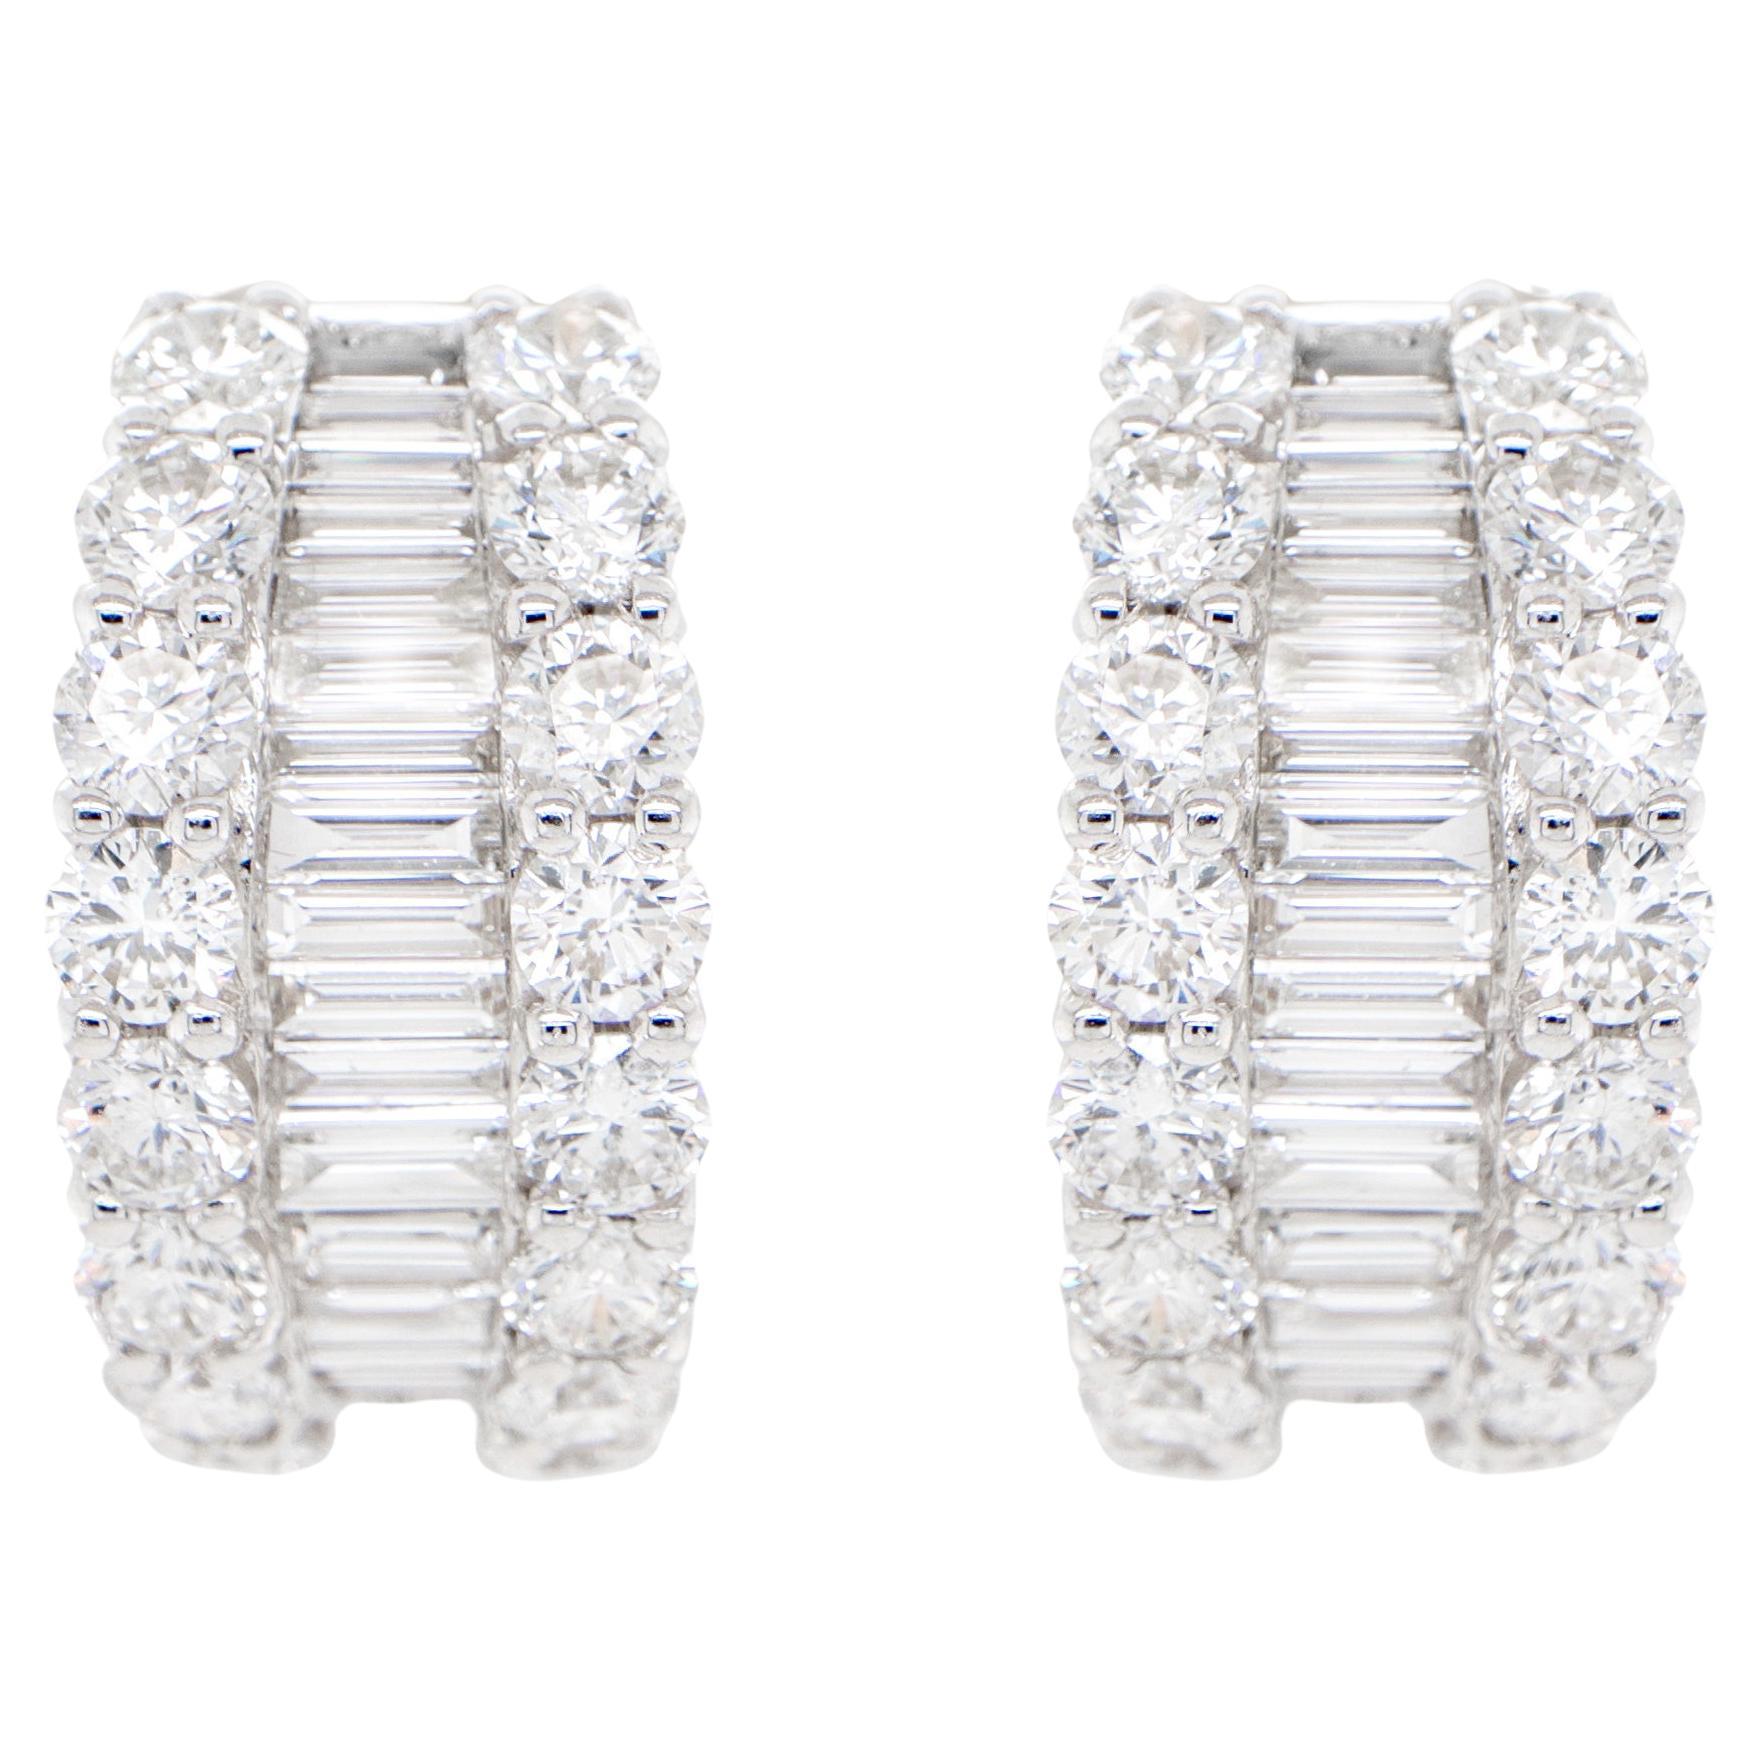 Diamond Earrings Baguette and Round 5.6 Carats 18K Gold